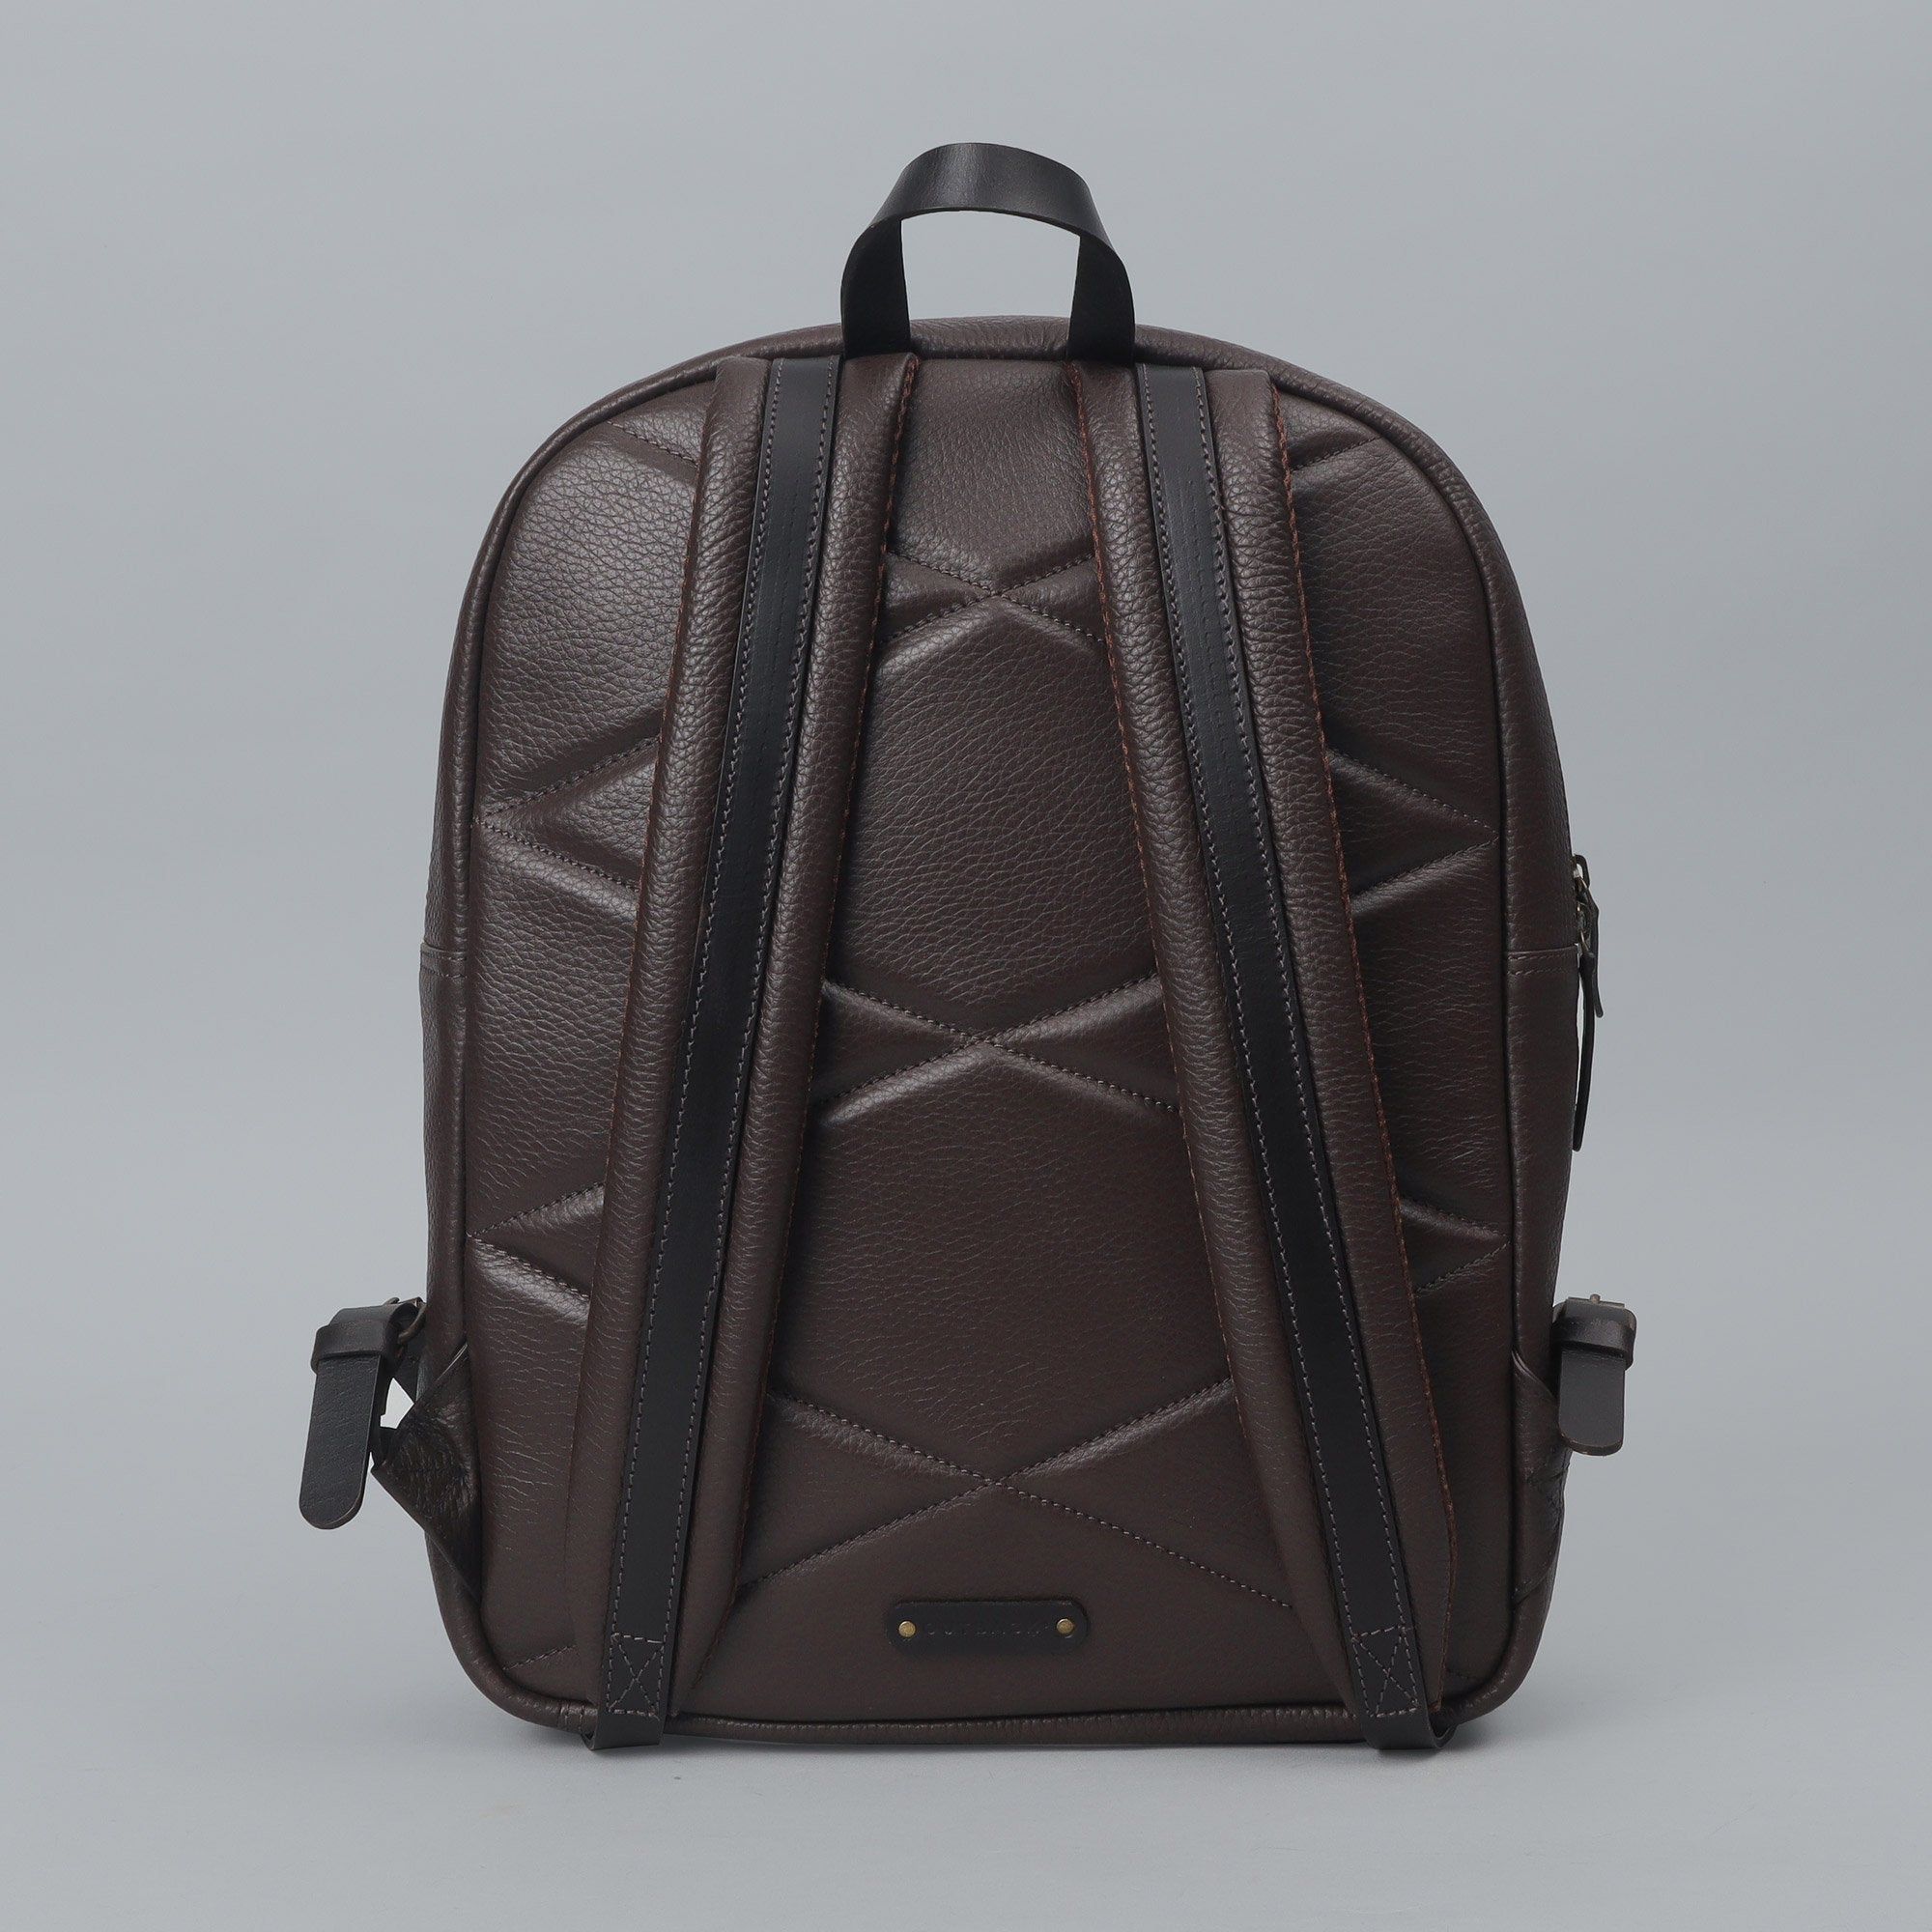 Brown leather travel backpack